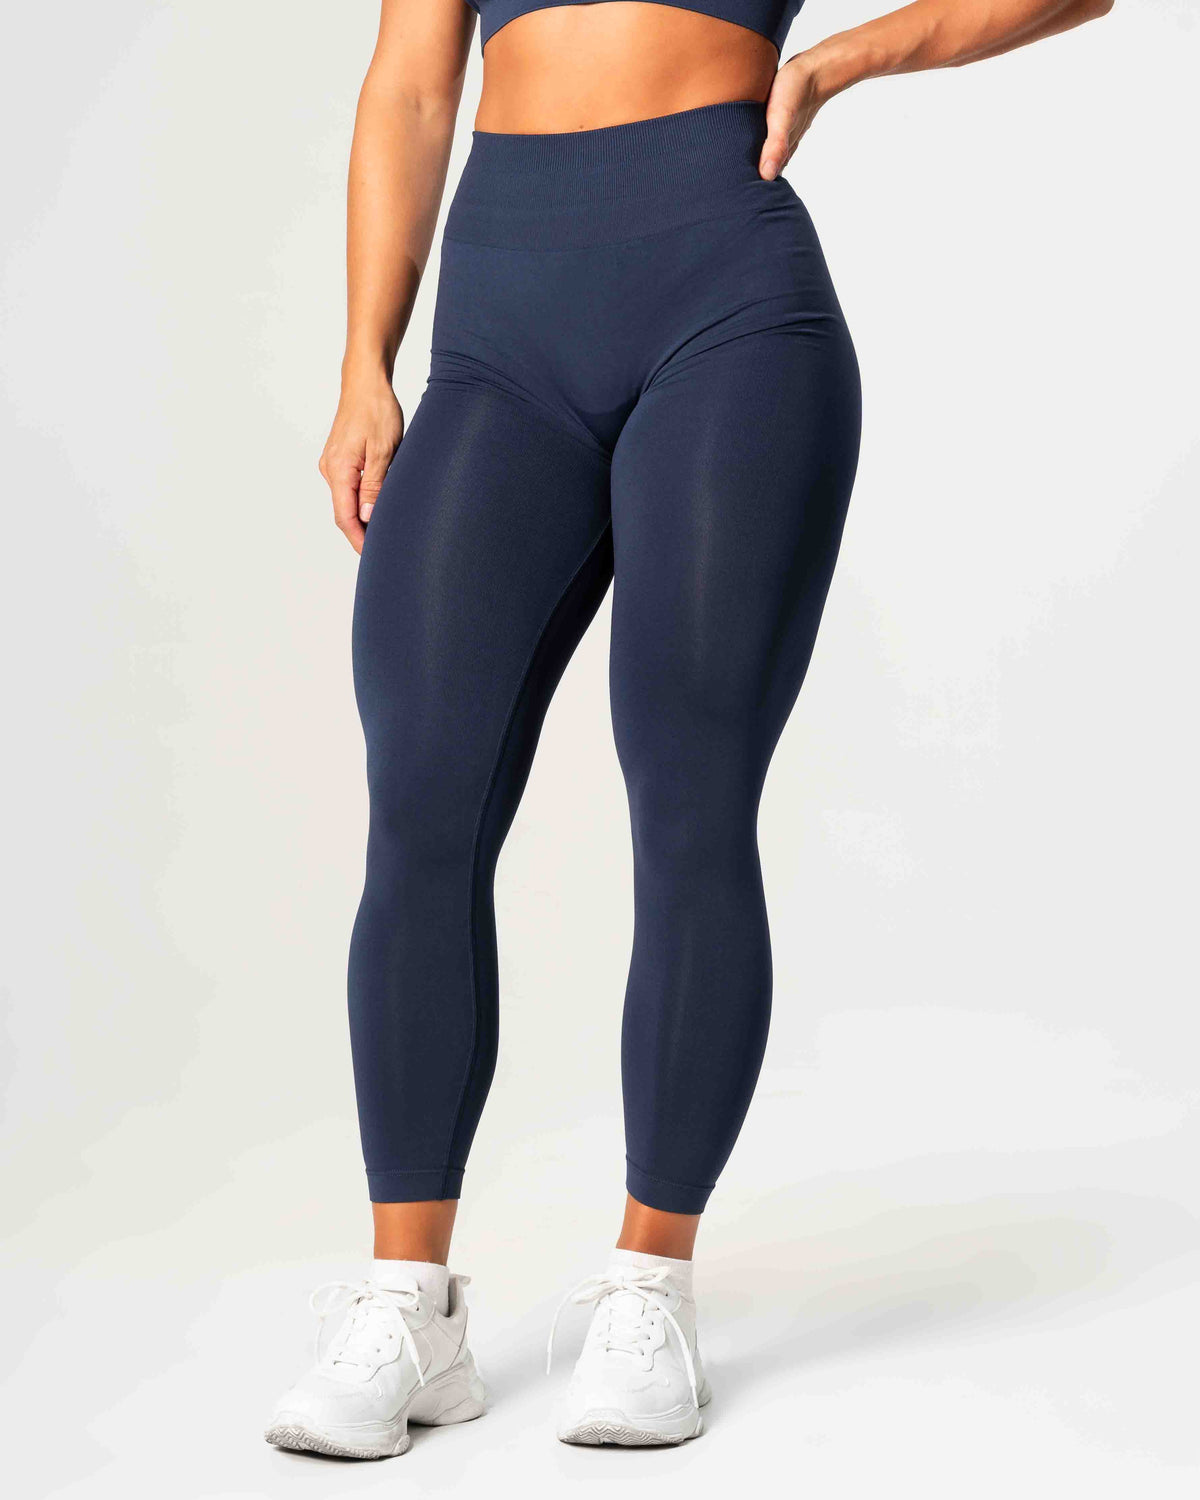 Apex Seamless Tights - Blue - S - RELODE